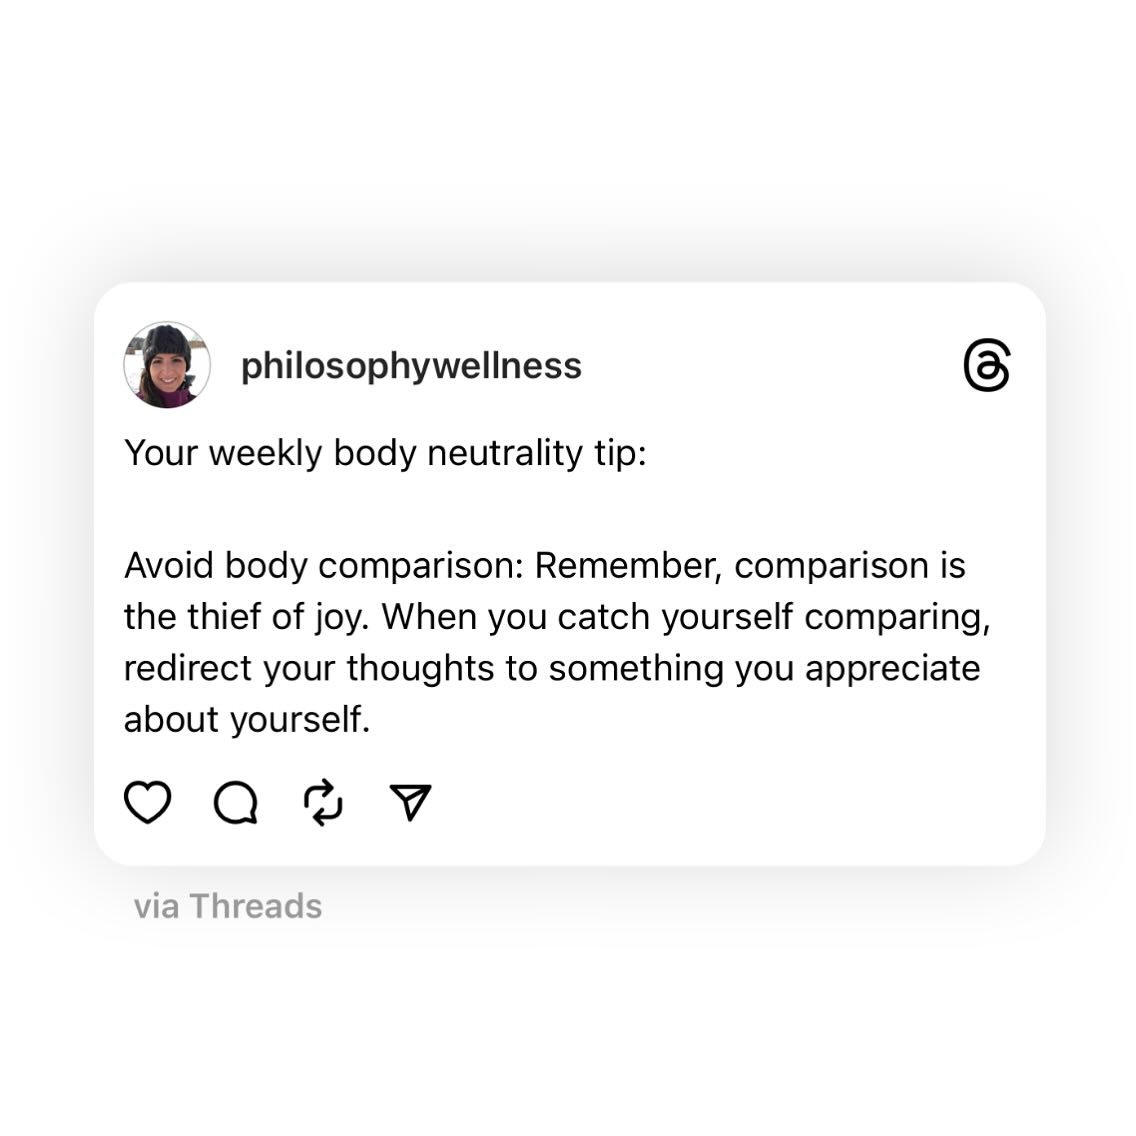 This week, I&rsquo;m putting the spotlight on body neutrality and self-appreciation&mdash;no frills, just real talk. 

I&rsquo;ve been there, scrolling through my feed, comparing my lows to someone else&rsquo;s highlight reel. It&rsquo;s a cycle that